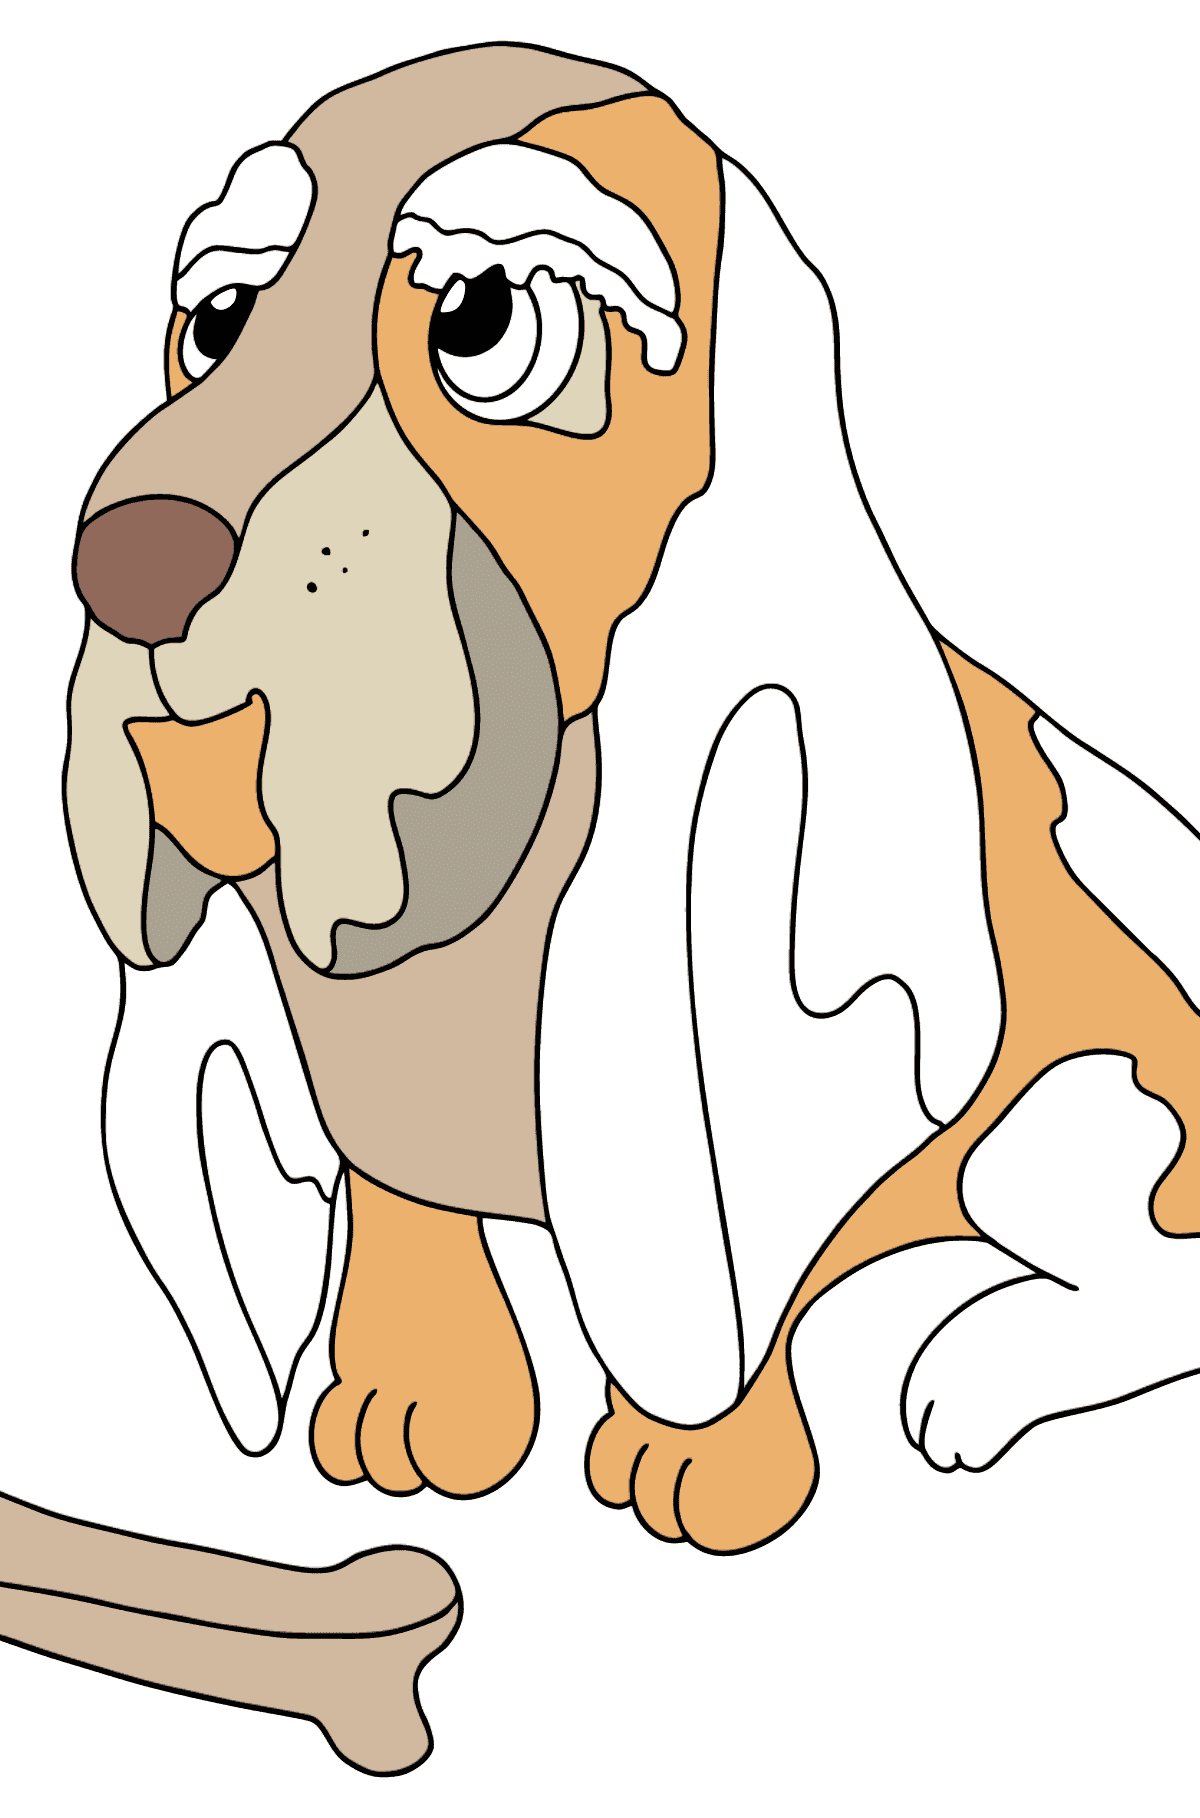 Coloring Page - A Dog is Sitting near a Bone - Coloring Pages for Kids